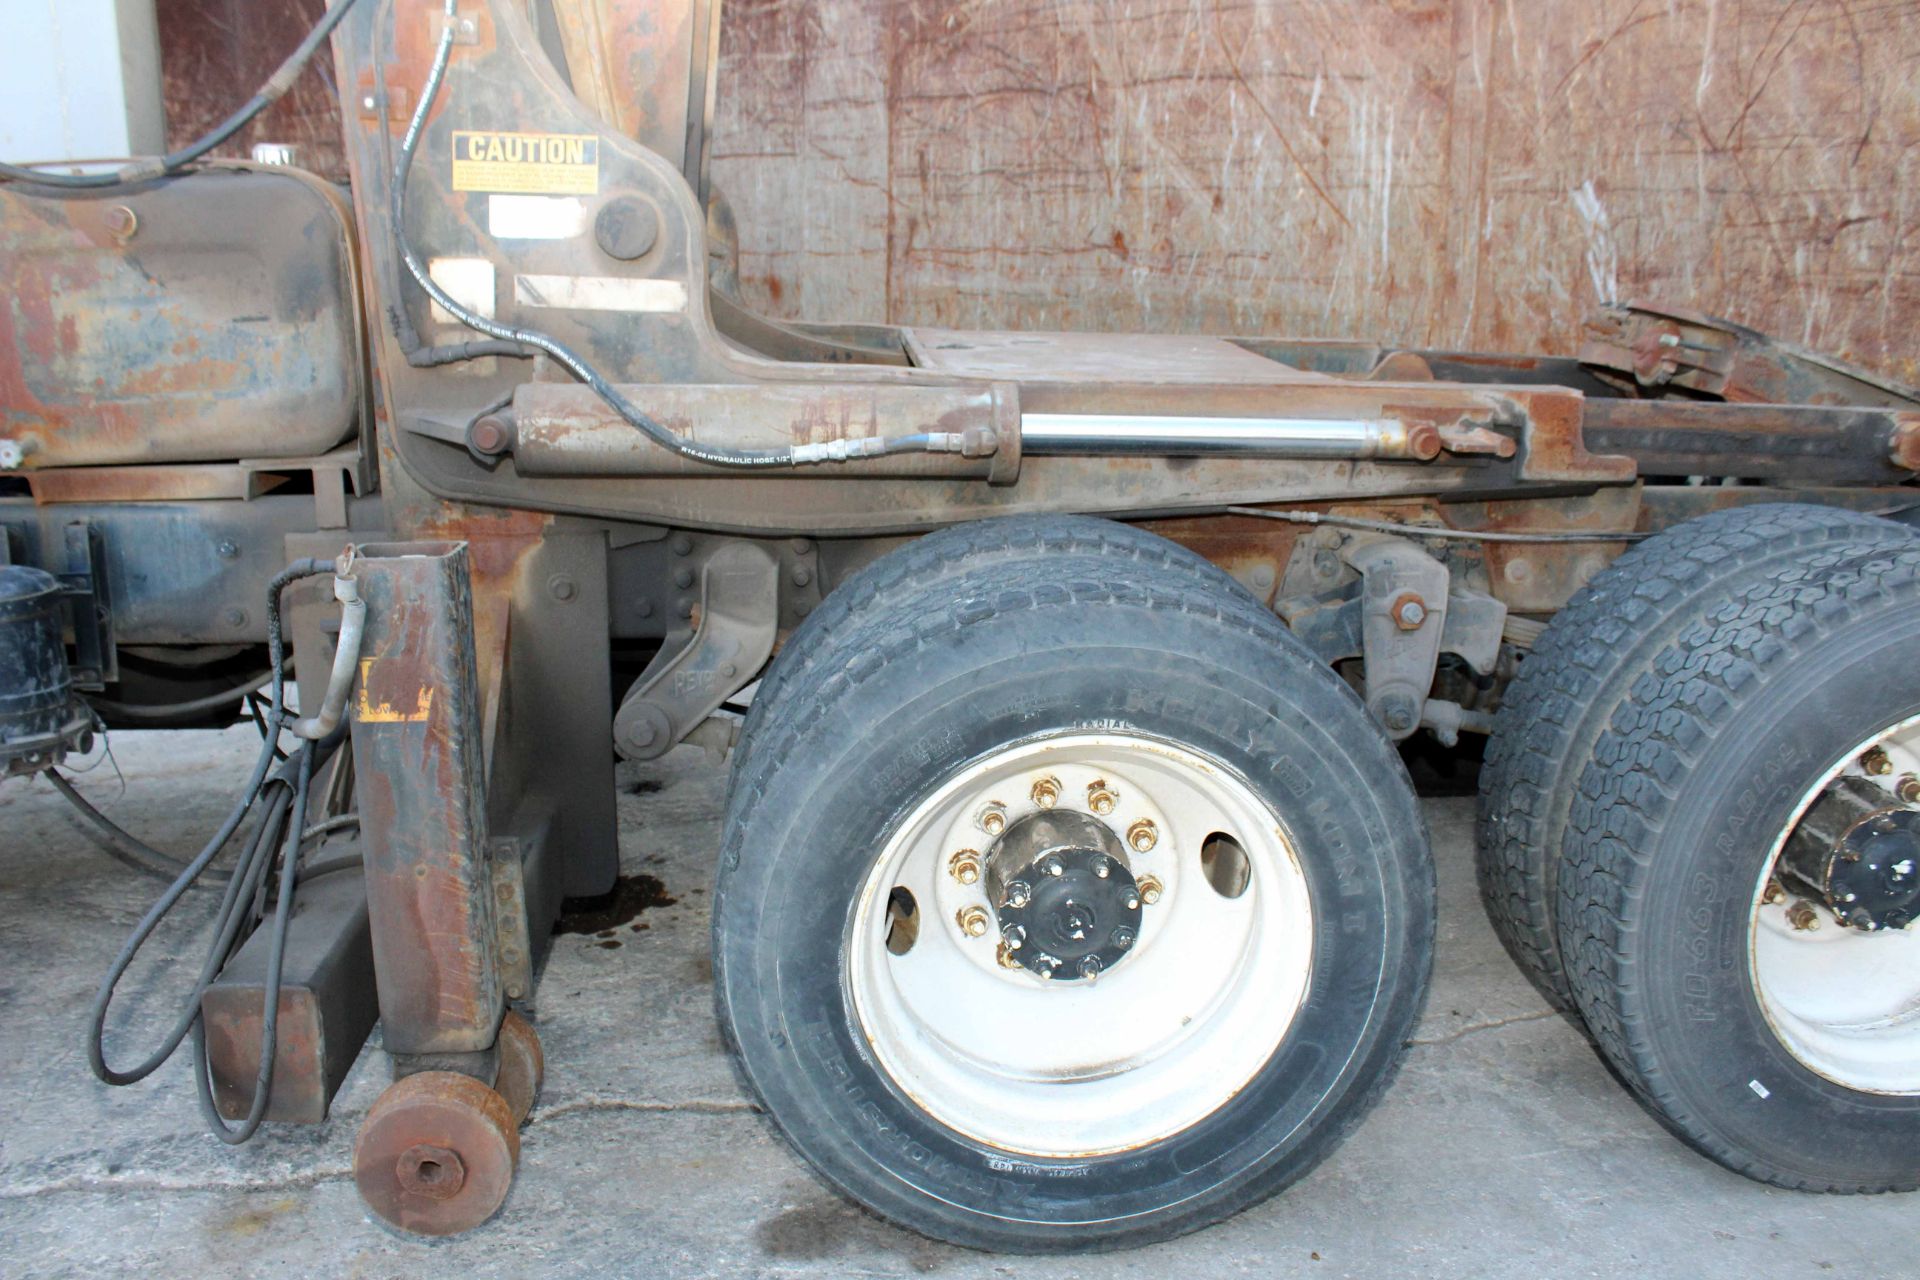 TILT LIFT TRACTOR, KENWORTH, new 1988, Odo: 740,000 miles, Chassis No. M515122 - Image 6 of 7